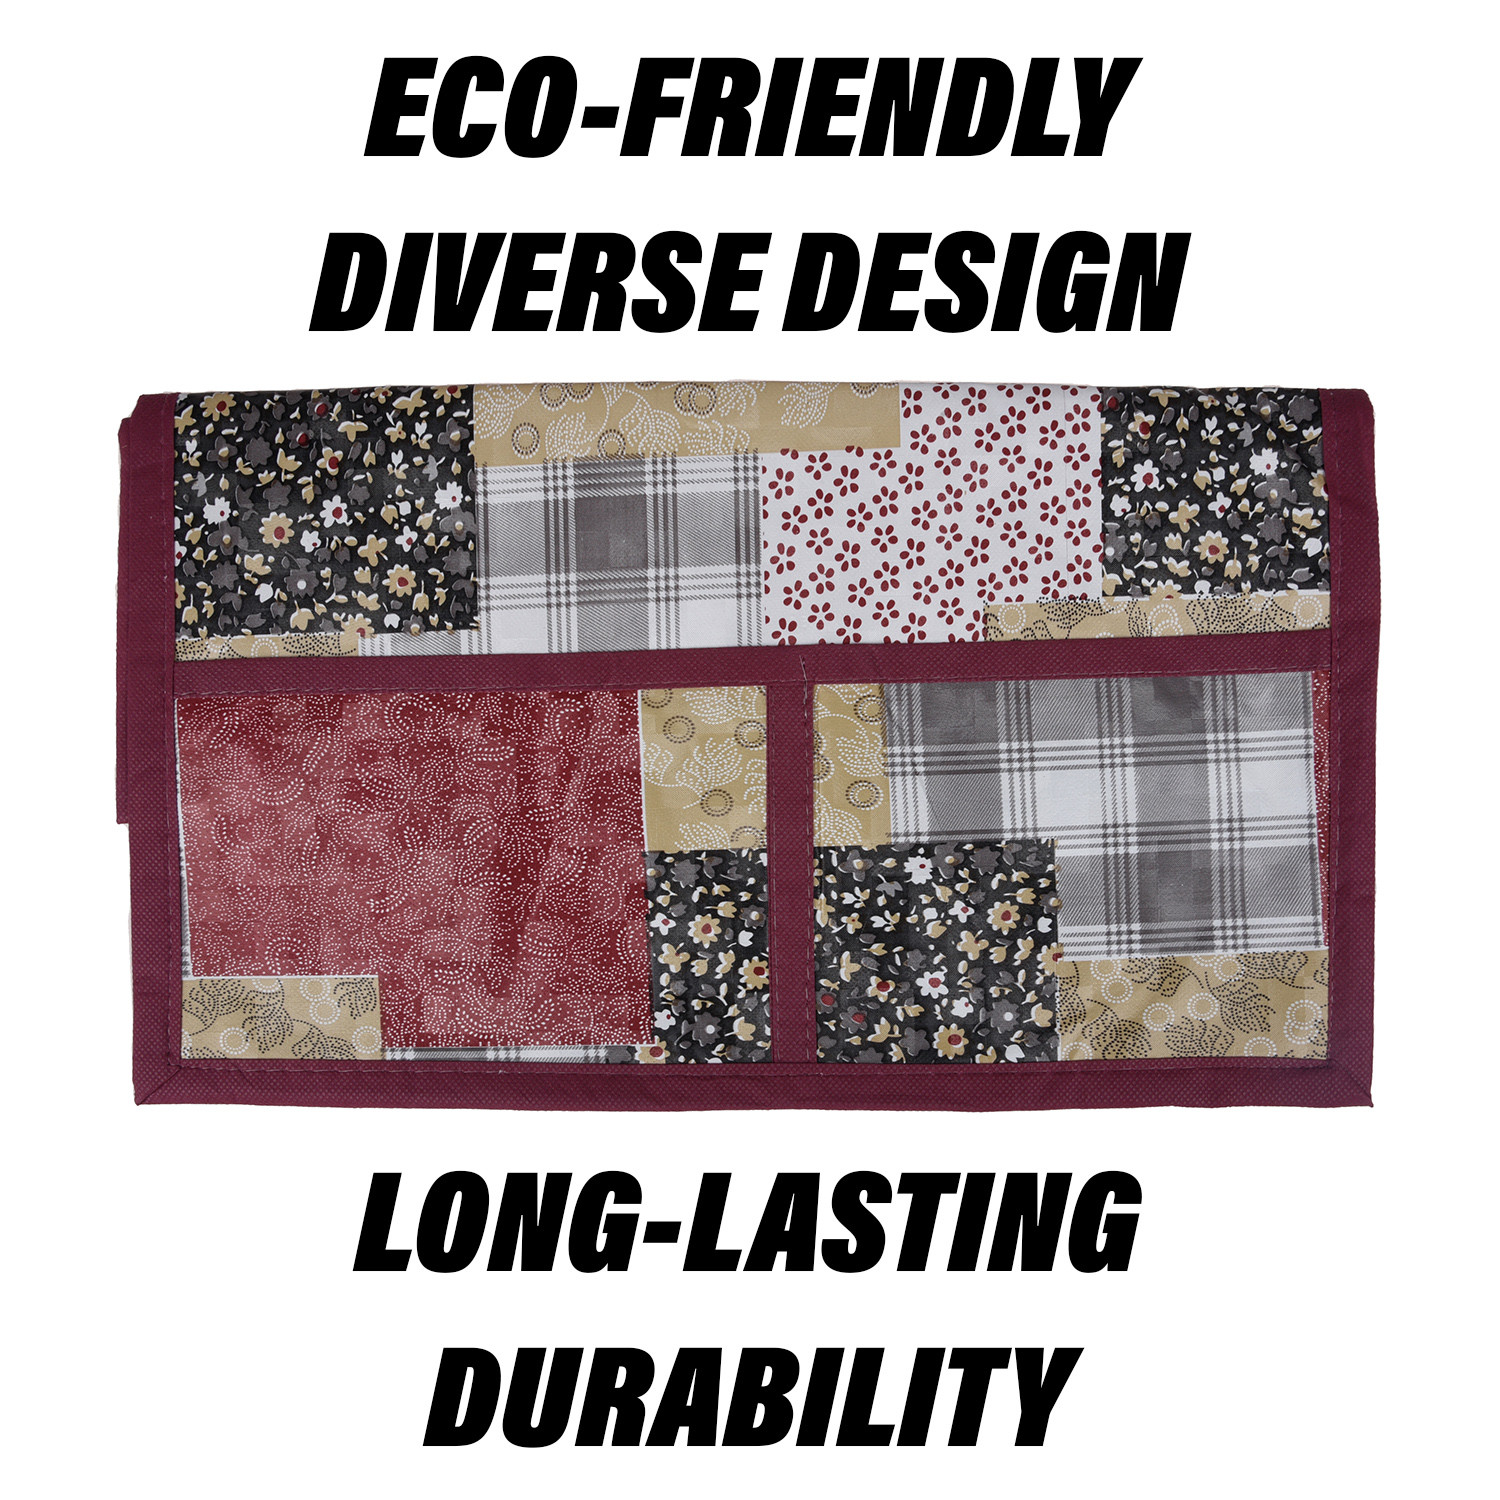 Kuber Industries Oven Top Cover | Microwave Oven Top Cover | Microwave Cover with 4 Utility Pockets | Oven Cover for Kitchen Décor | Barik Flower Oven Top Cover | Maroon